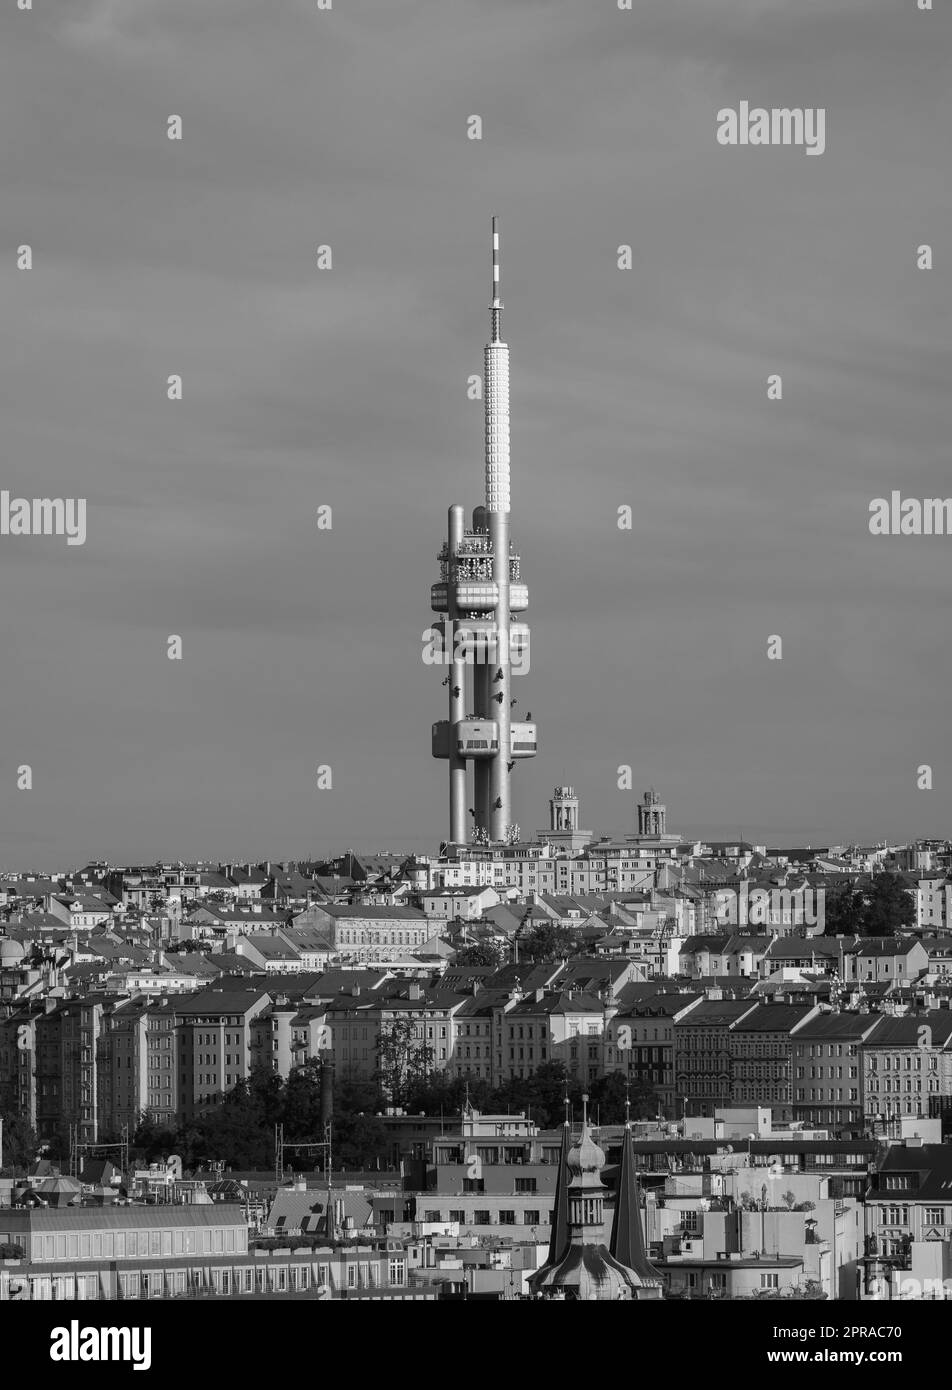 PRAGUE, CZECH REPUBLIC, EUROPE - Zizkov Television Tower, a 216m transmitter tower, and cityscape. Stock Photo